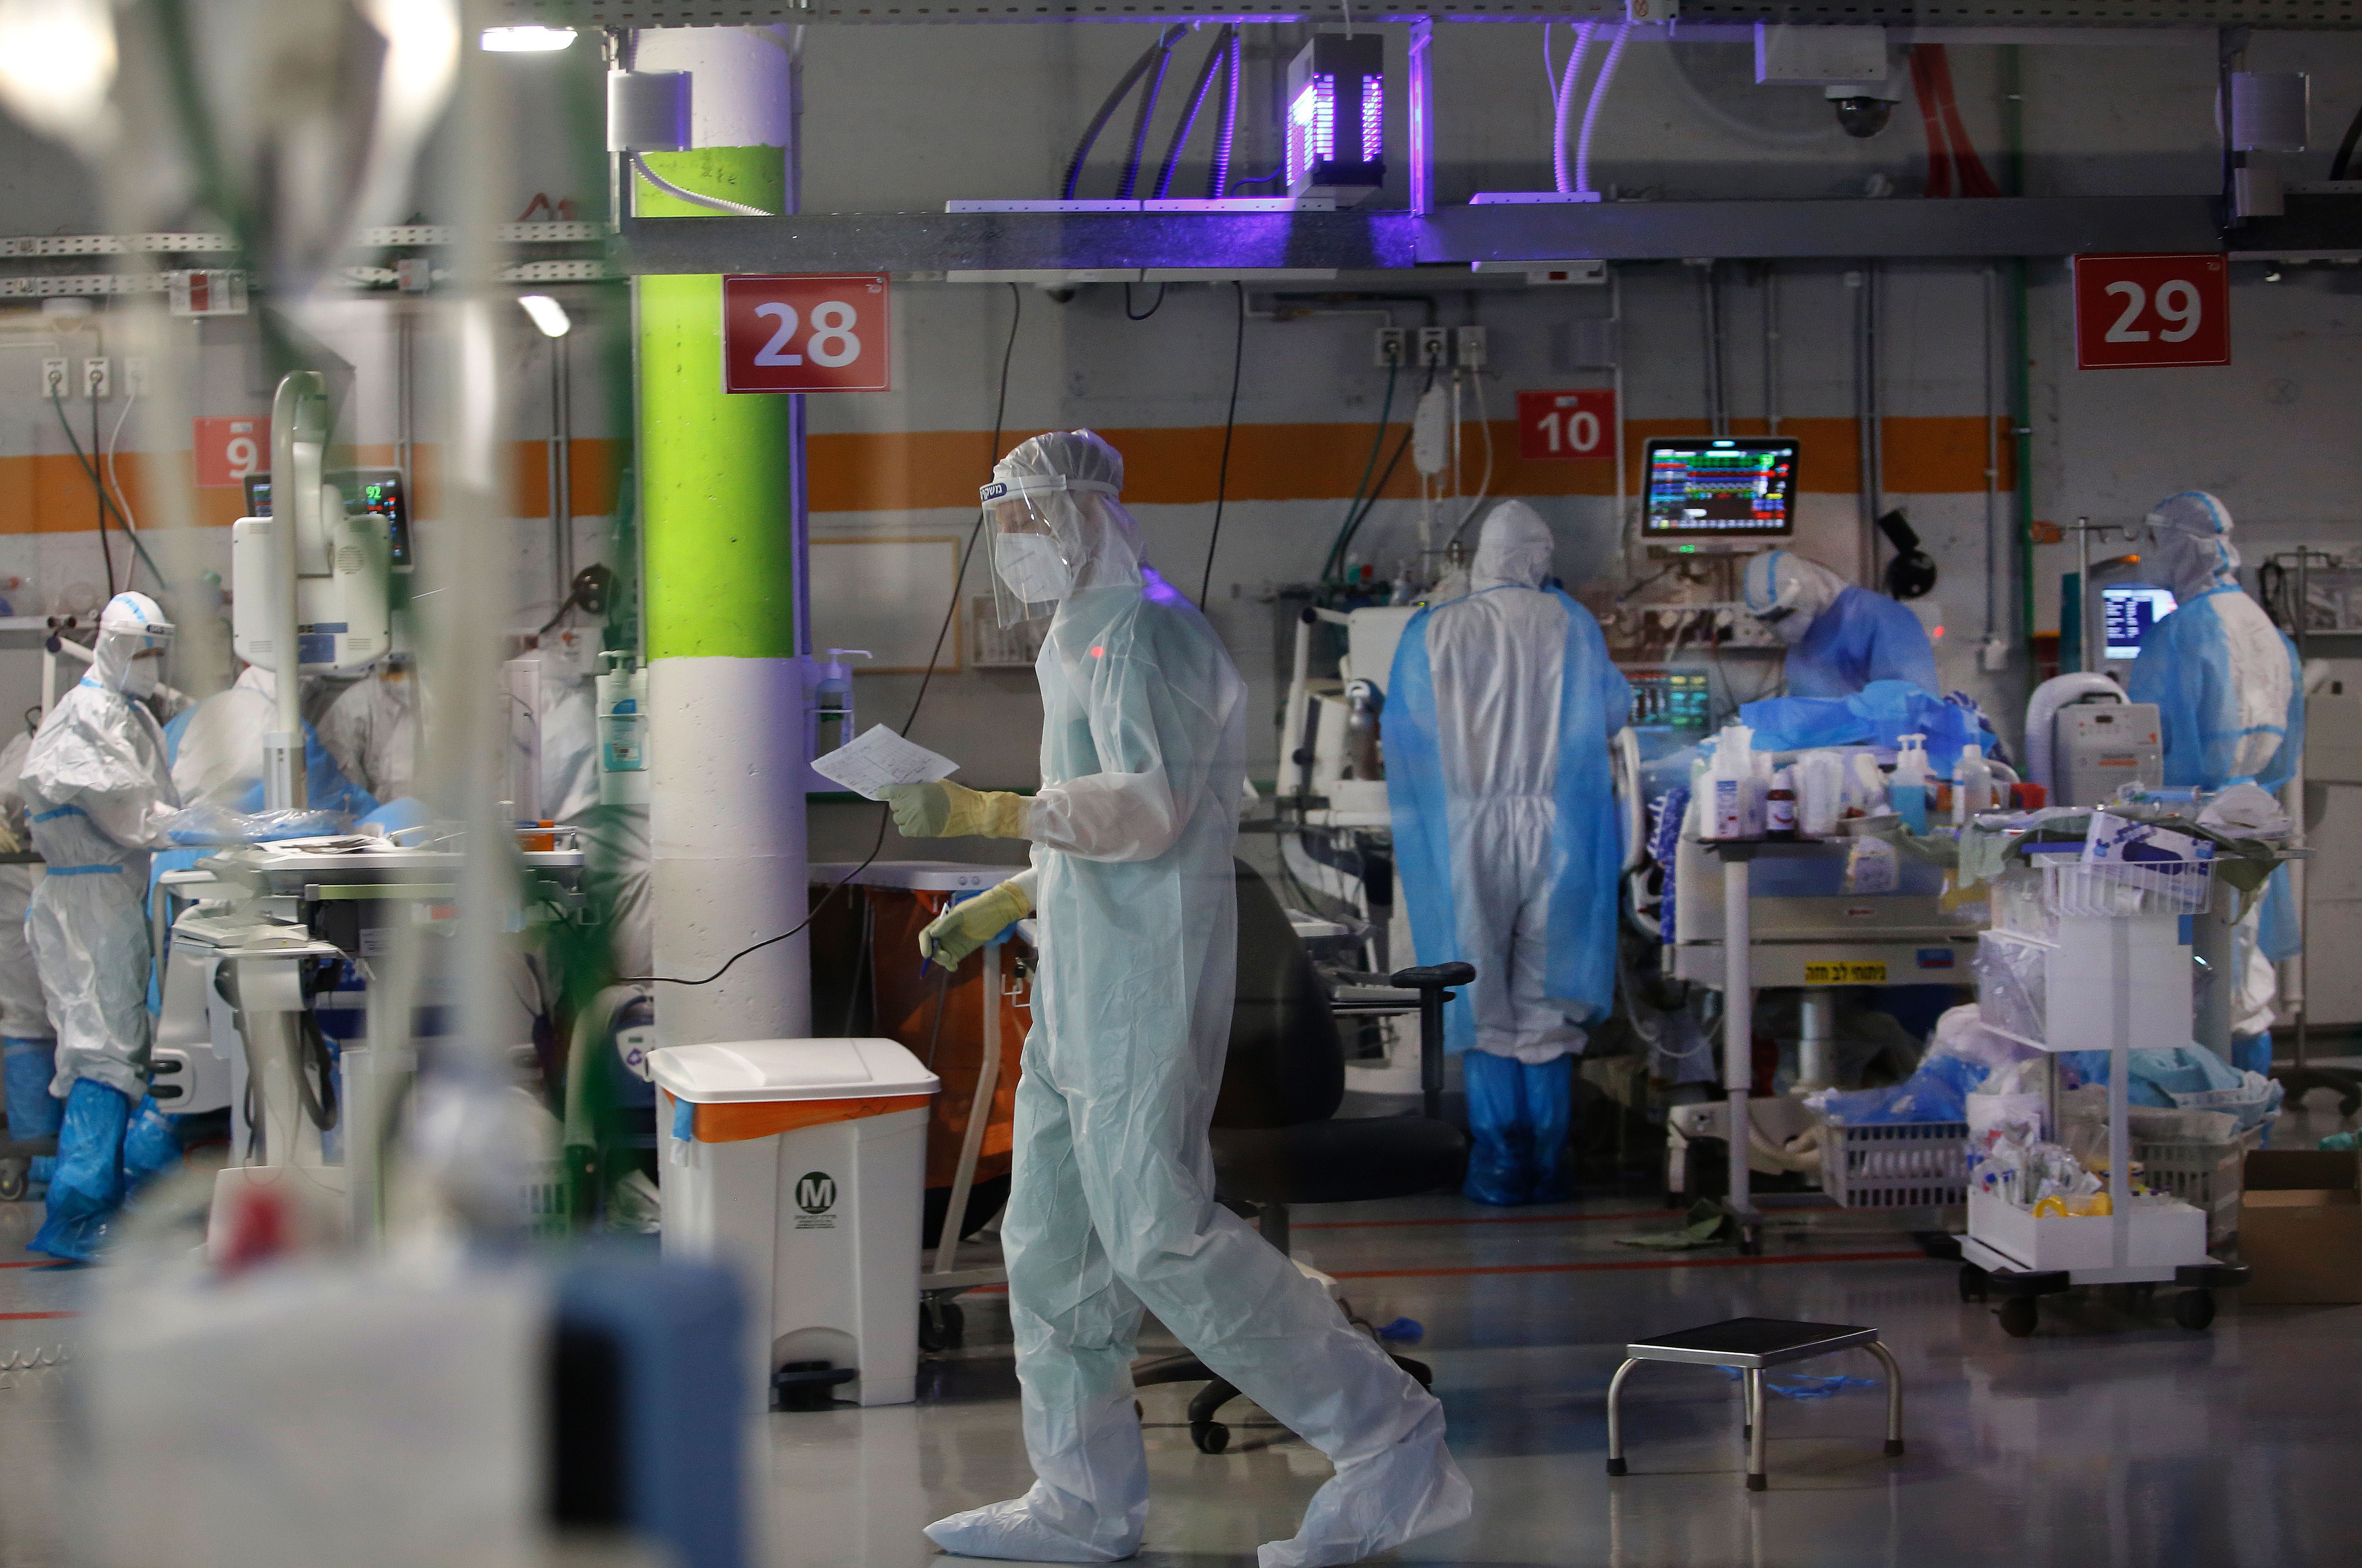 Medical staff work in the Covid-19 isolation ward of Sheba Medical Center in Ramat Gan, Israel, on June 30.